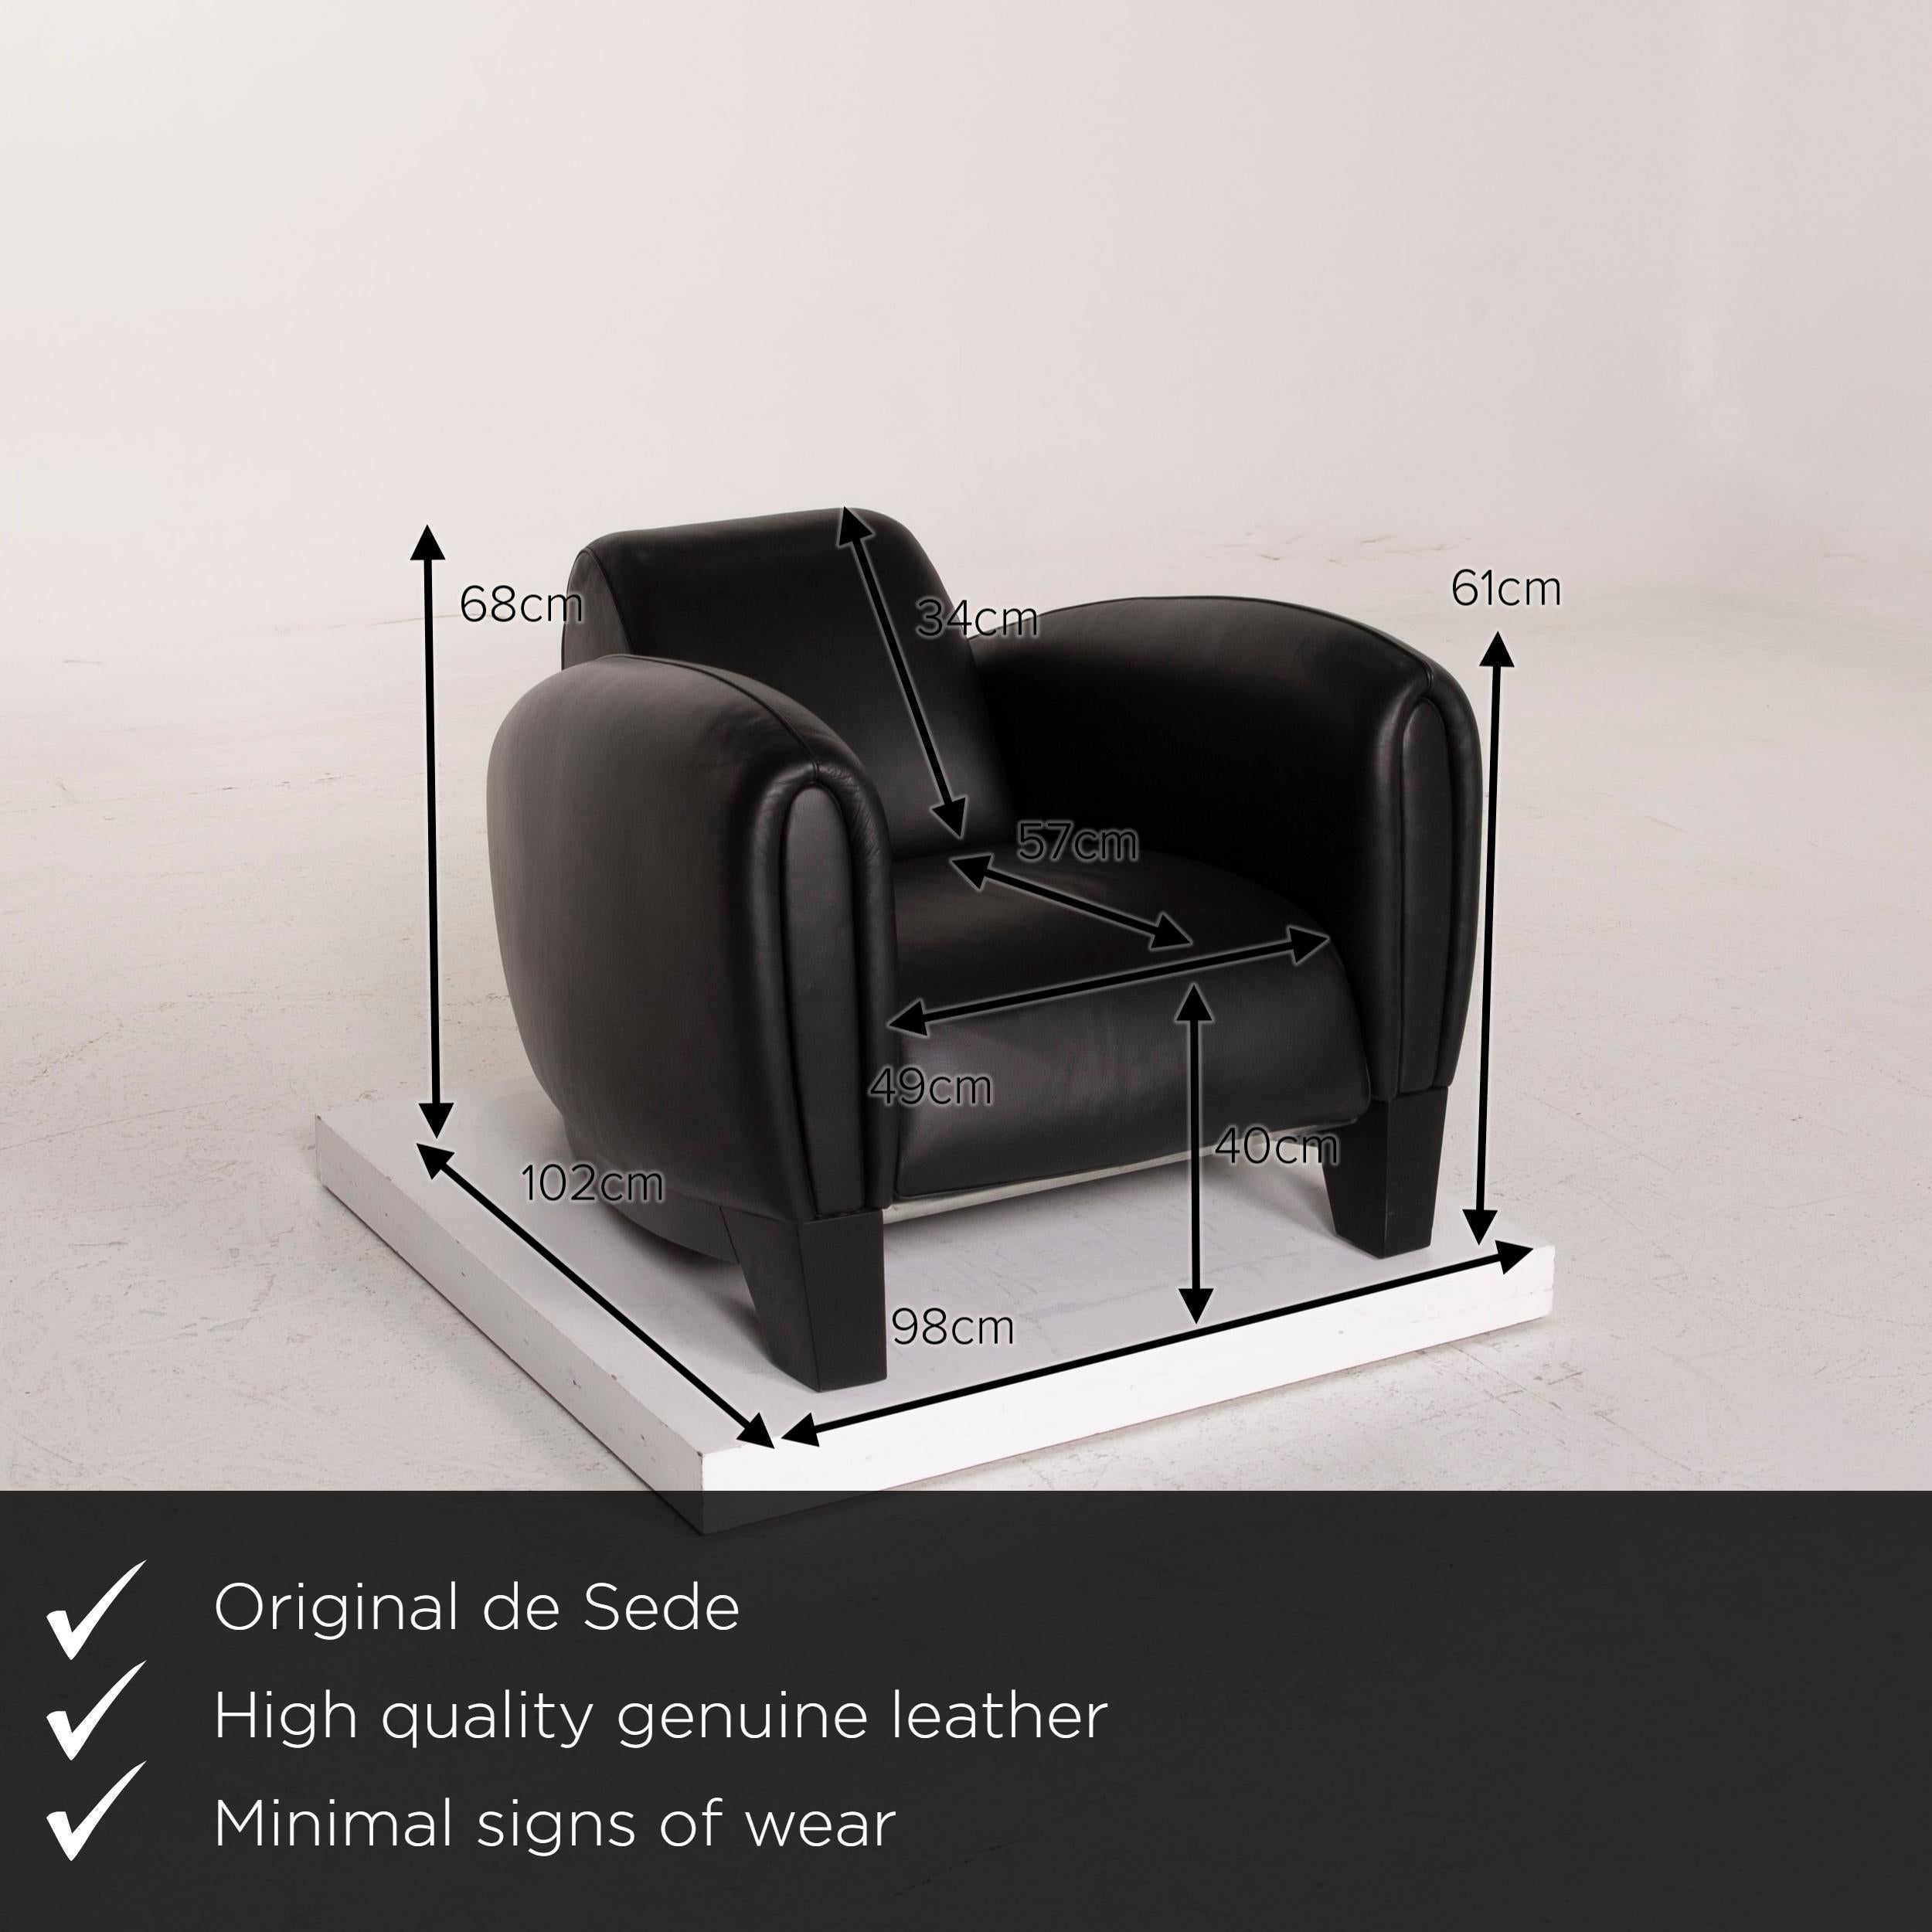 We present to you a De Sede ds 57 leather armchair black.
  
 

 Product measurements in centimeters:
 

Depth 102
Width 98
Height 68
Seat height 40
Rest height 61
Seat depth 57
Seat width 49
Back height 34.